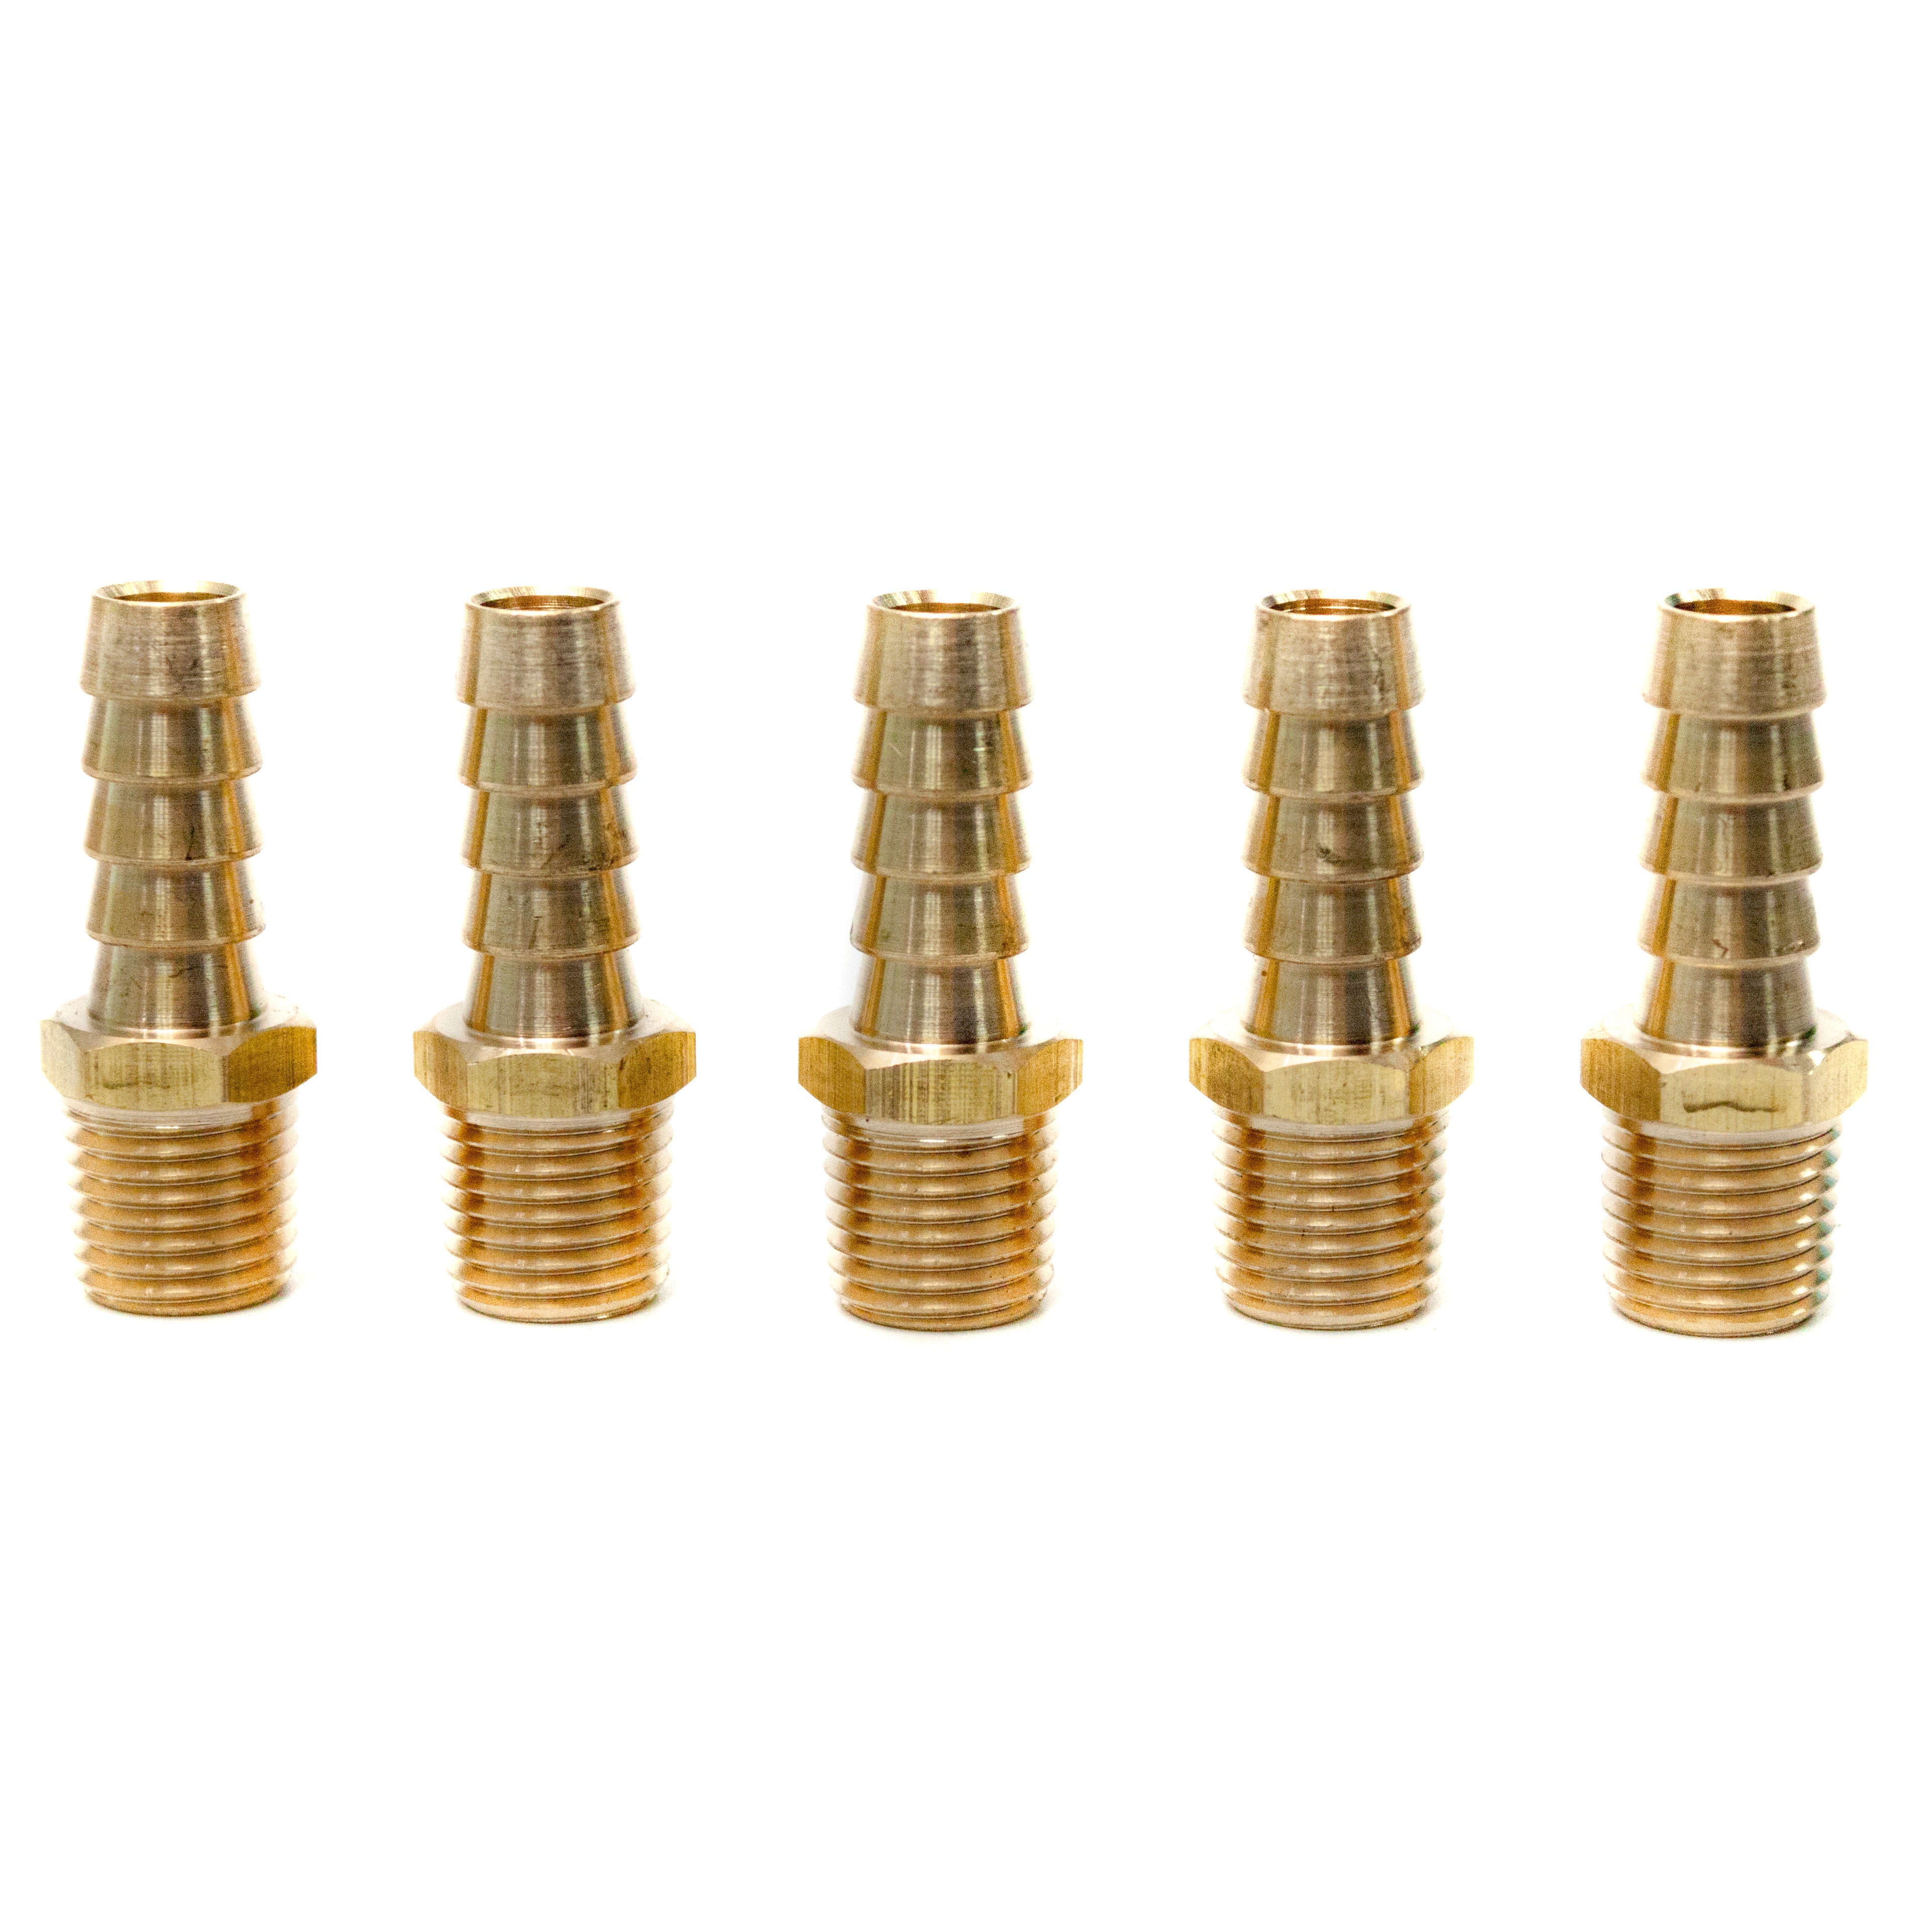 LTWFITTING 3/8-Inch Hose Barb x 1/4-Inch Male NPT Brass Coupler/Connector Fitting Fuel Gas(Pack of 5)